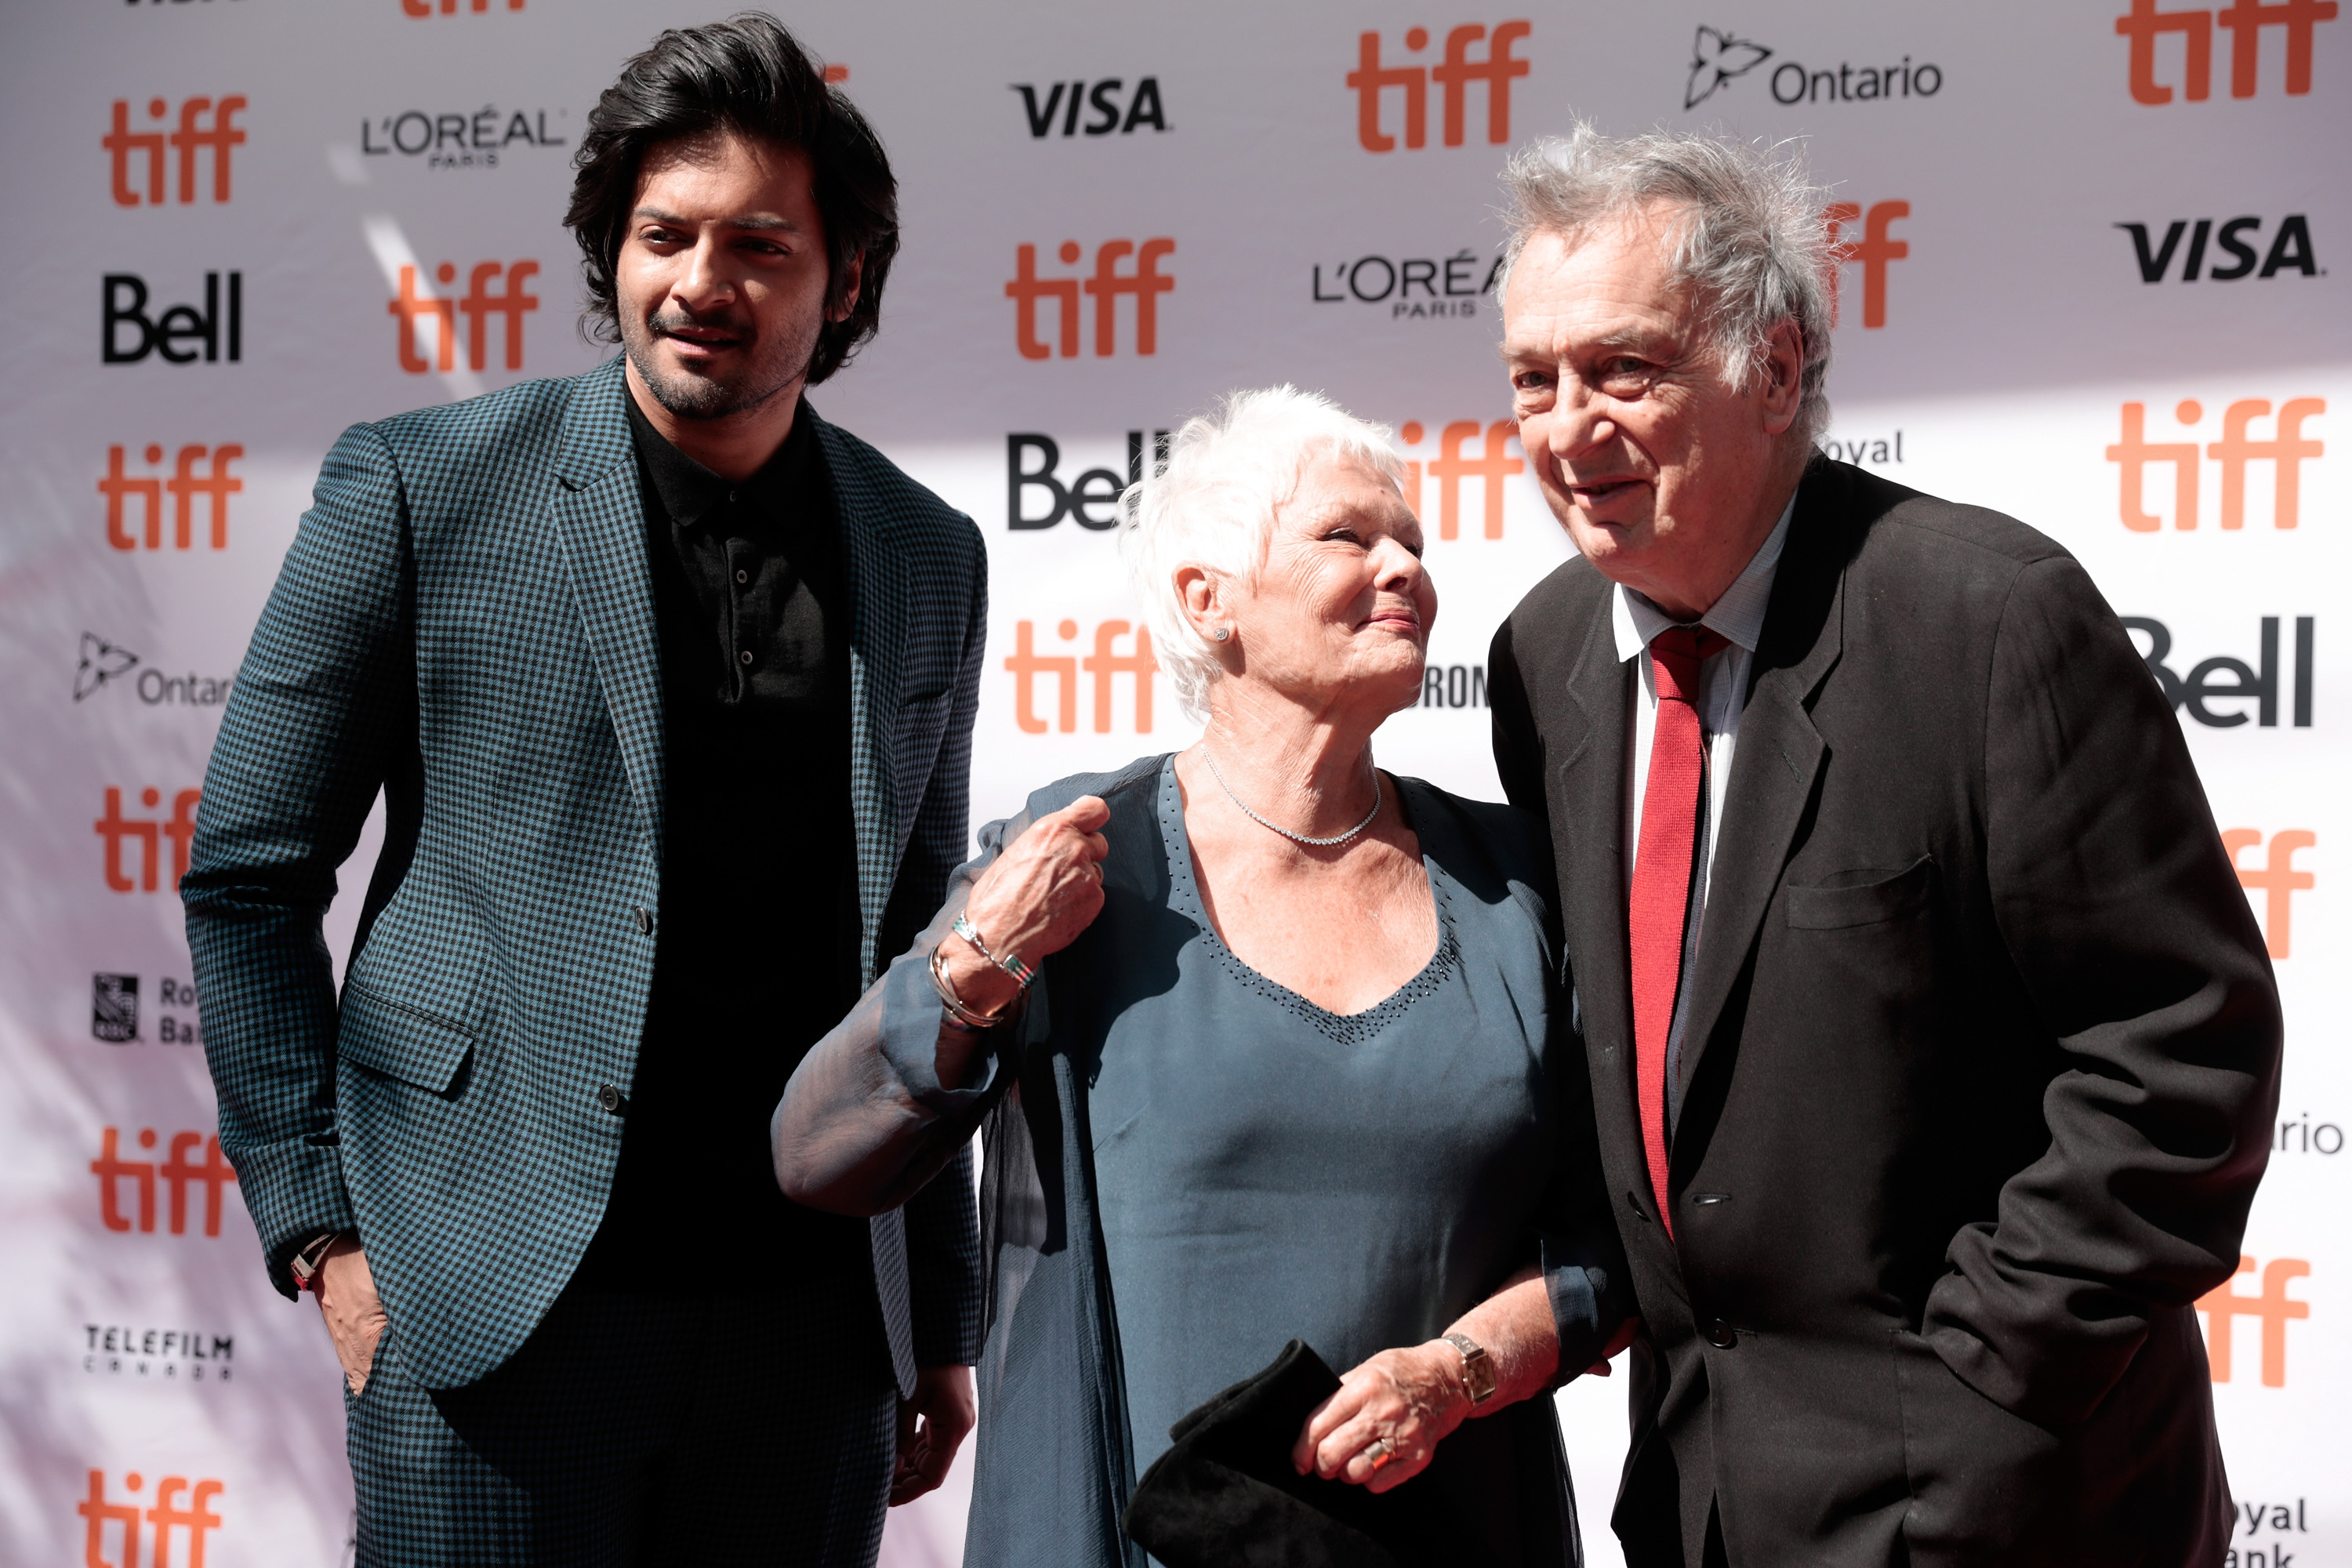 Ali Fazal, Judi Dench, and Stephen Frears at the premiere of "Victoria & Abdul" during the 2017 Toronto International Film Festival in Toronto, Canada, on September 10, 2017 | Source: Getty Images